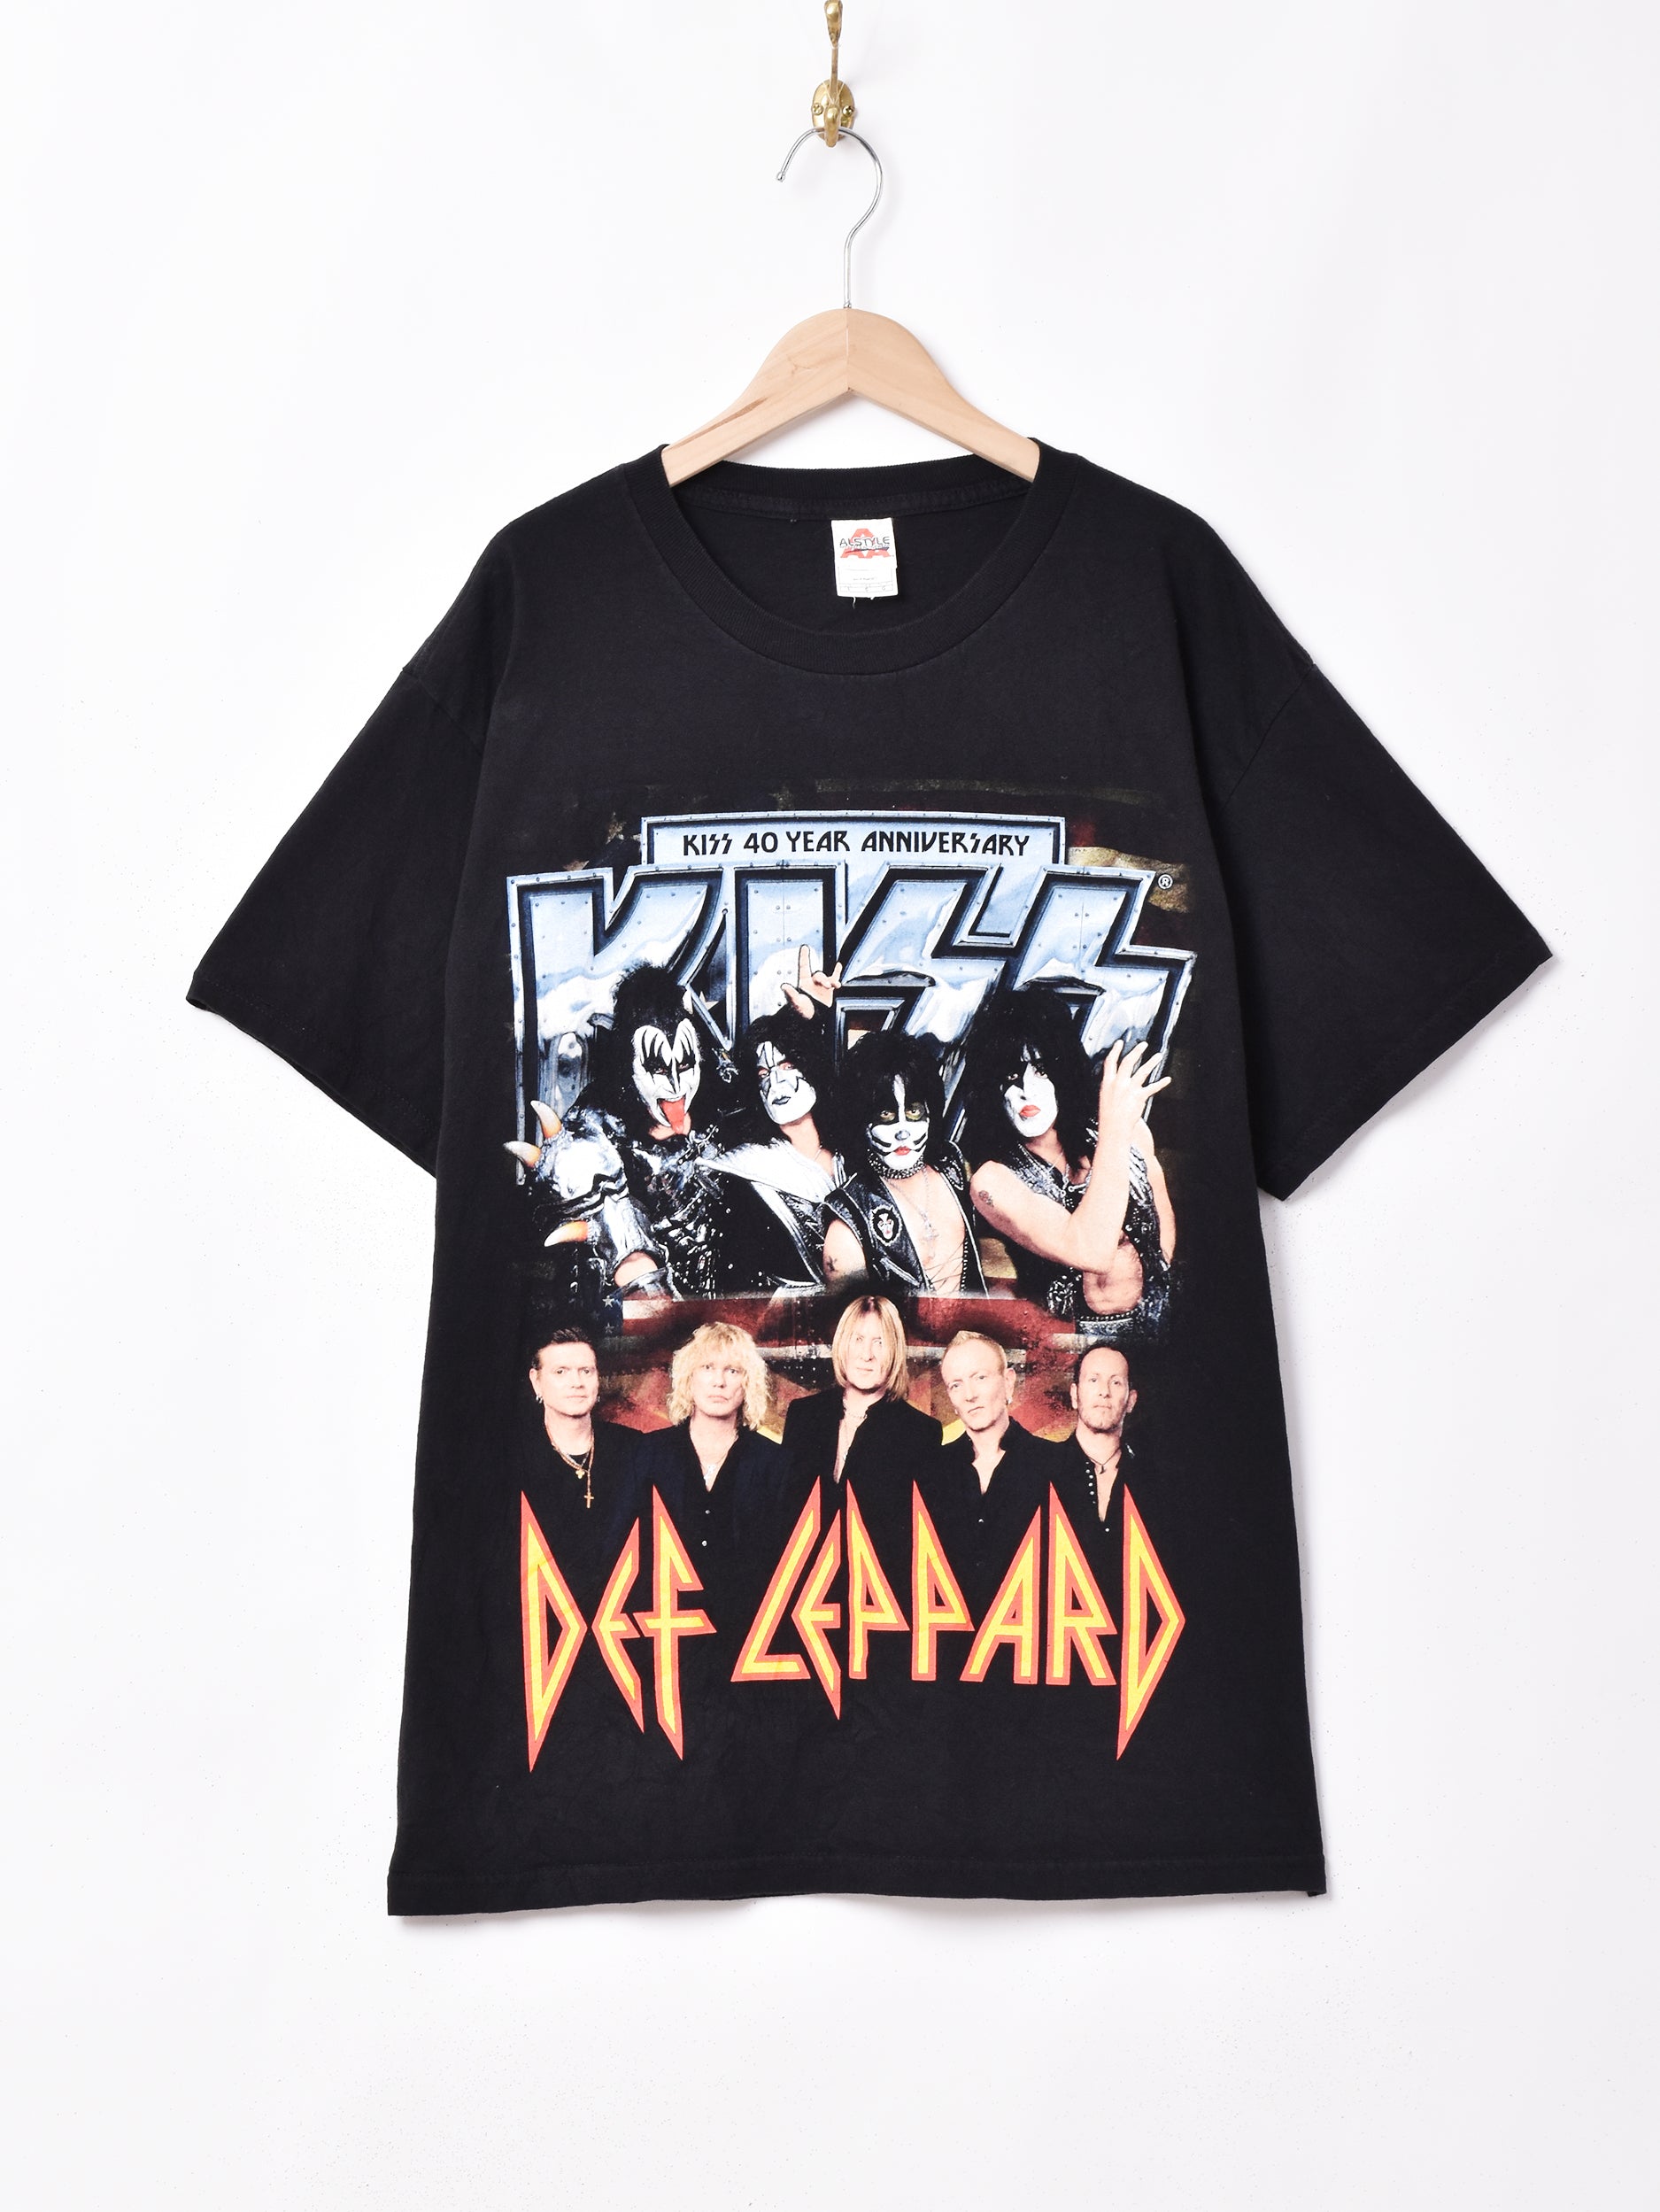 KISS×DEF LAPPARD ツアーTシャツ – 古着屋Top of the Hillのネット通販 ...